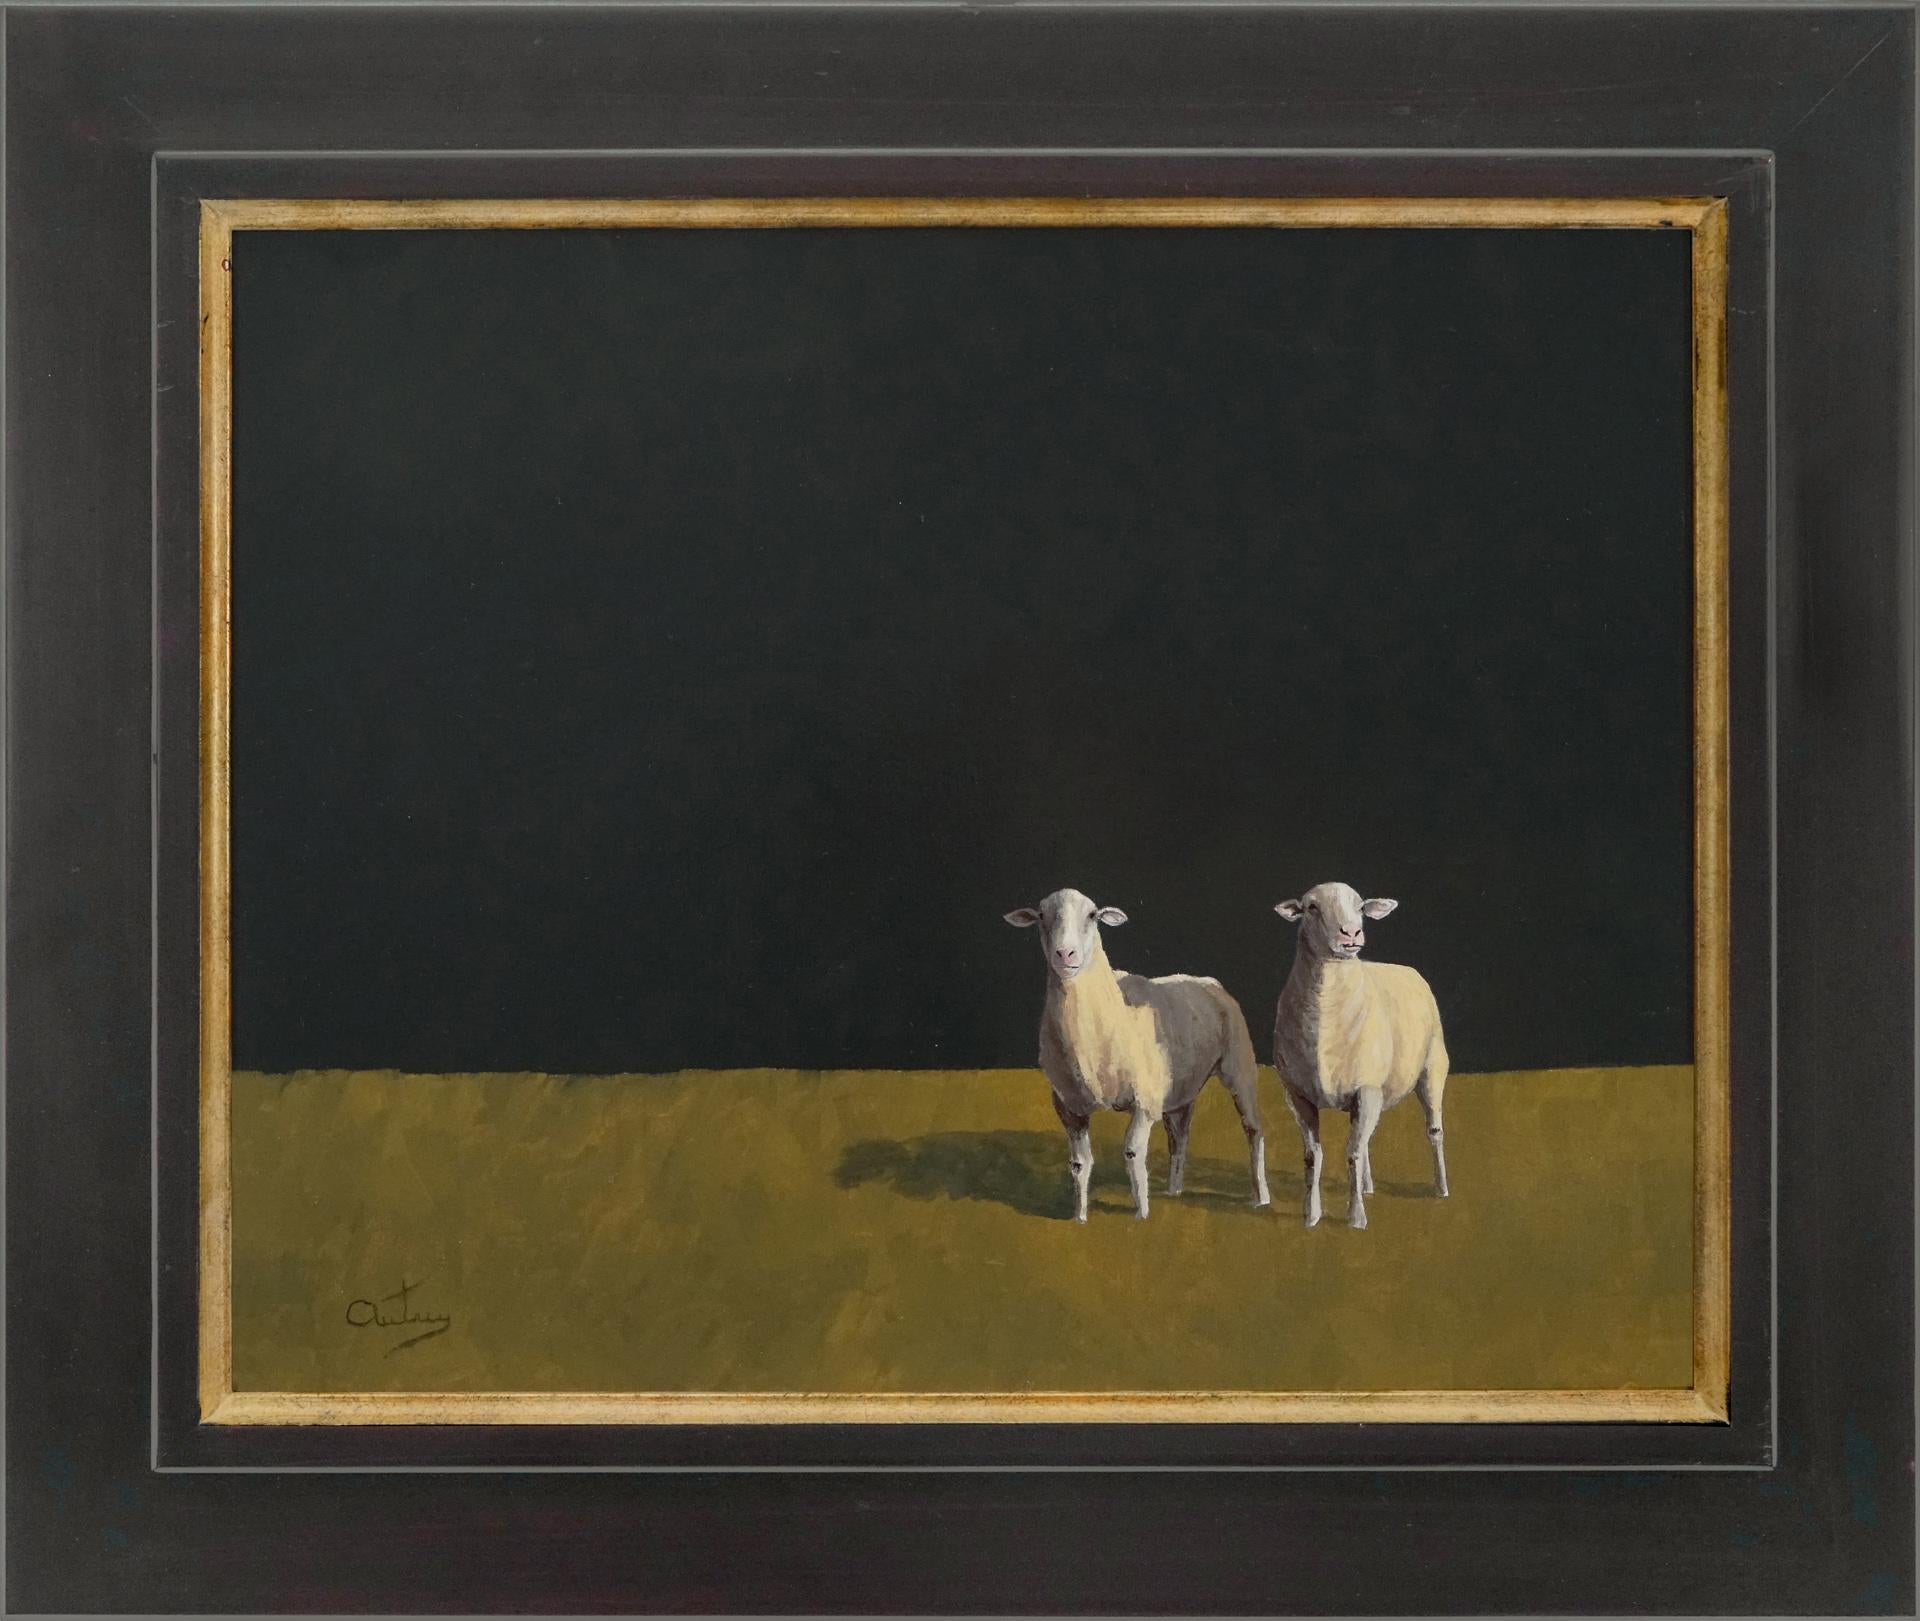   LOOK FOR FREE SHIPPING AT CHECKOUT. IF NOT AVAILABLE GALLERY PAYS FOR SHIPPING IN USA.  ALSO SHOWN ARE OTHER AVAILABLE PAINTINGS.    

Grazing is an oil painting of sheep who look as if they are in  search of something. Grazing is  by Texas artist